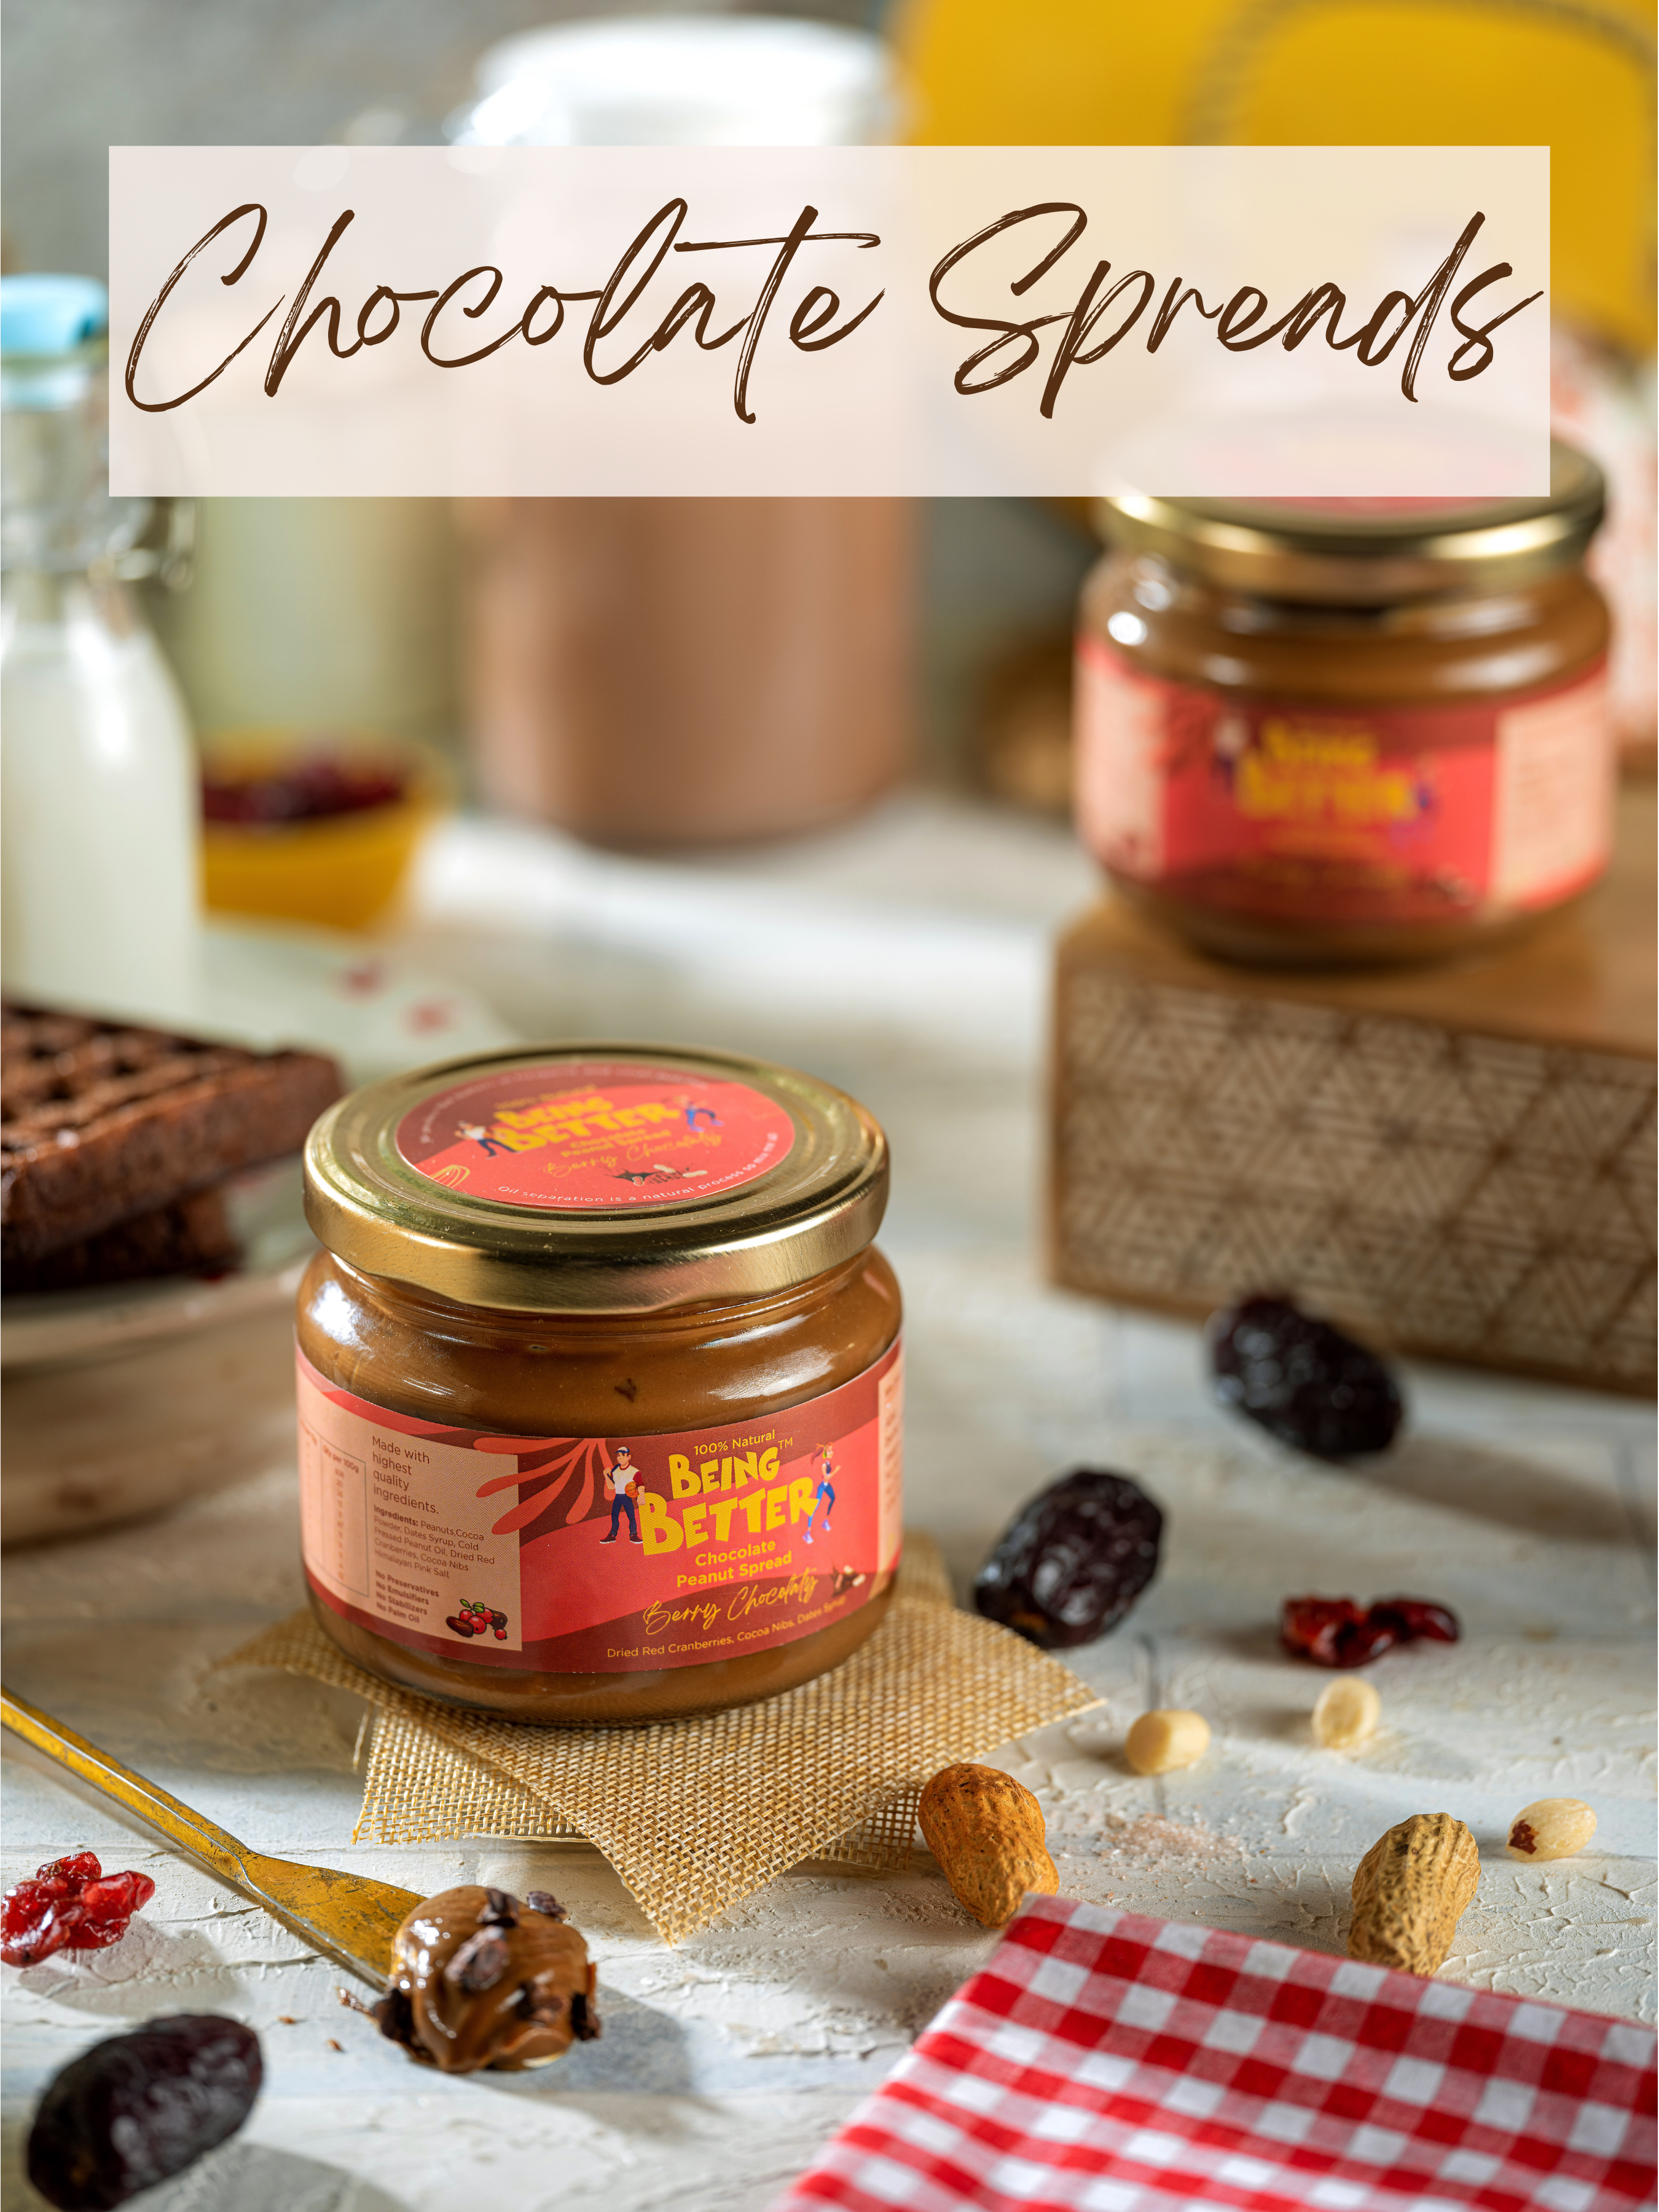 Chocolate Spread- Berry Chocolaty with Cocoa Nibs and Red Cranberries